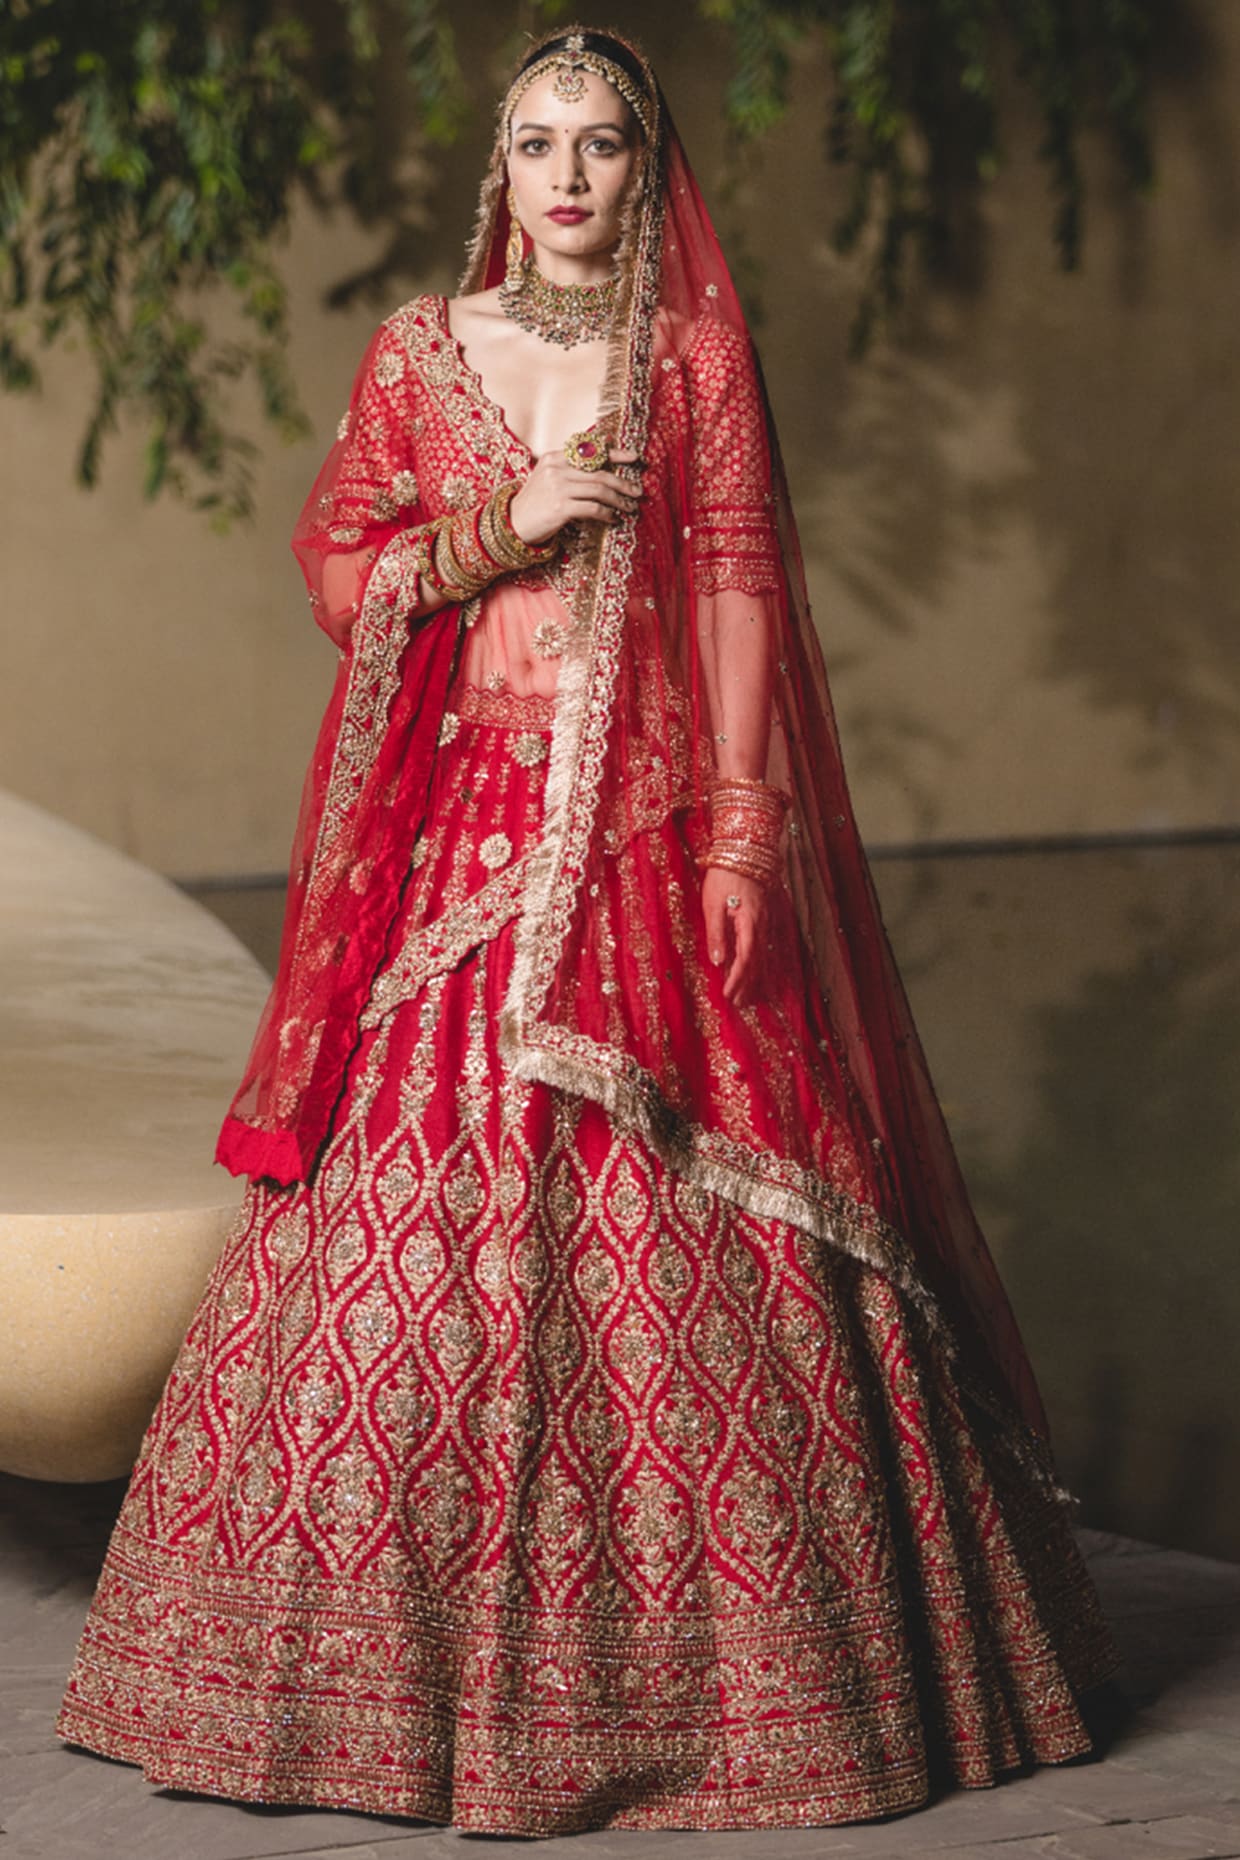 Blood Red Beautiful Indian Wedding Dress for Bride on Her Barat – Nameera  by Farooq